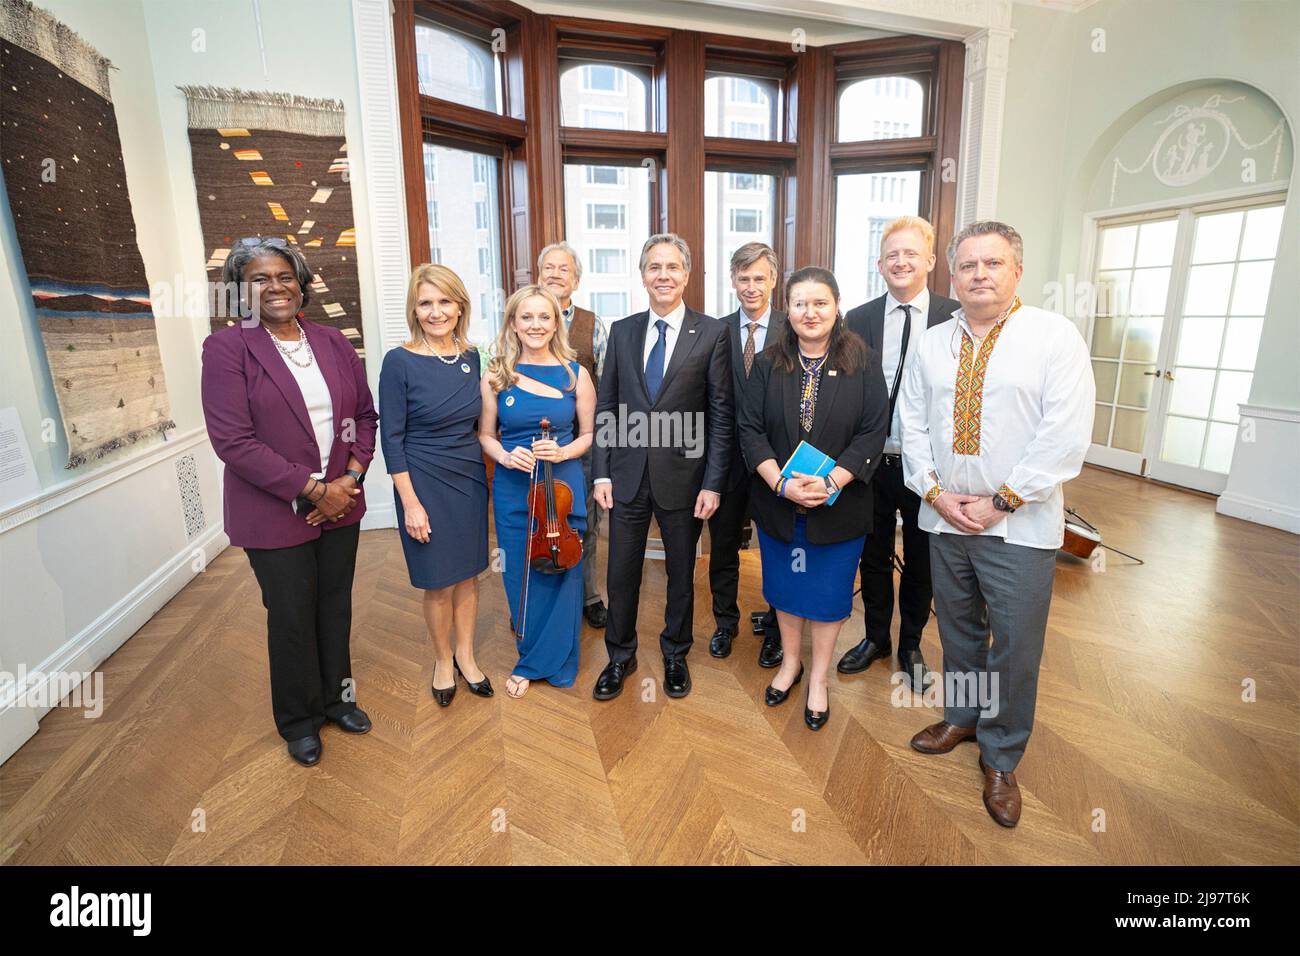 New York City, United States of America. 19 May, 2022. U.S. Secretary of State Antony Blinken, center, and U.N. Ambassador Linda Thomas-Greenfield, left, pose with artists and members during a visit to the Ukrainian Institute of America, May 19, 2022 in New York City, New York.  Credit: Freddie Everett/State Department/Alamy Live News Stock Photo